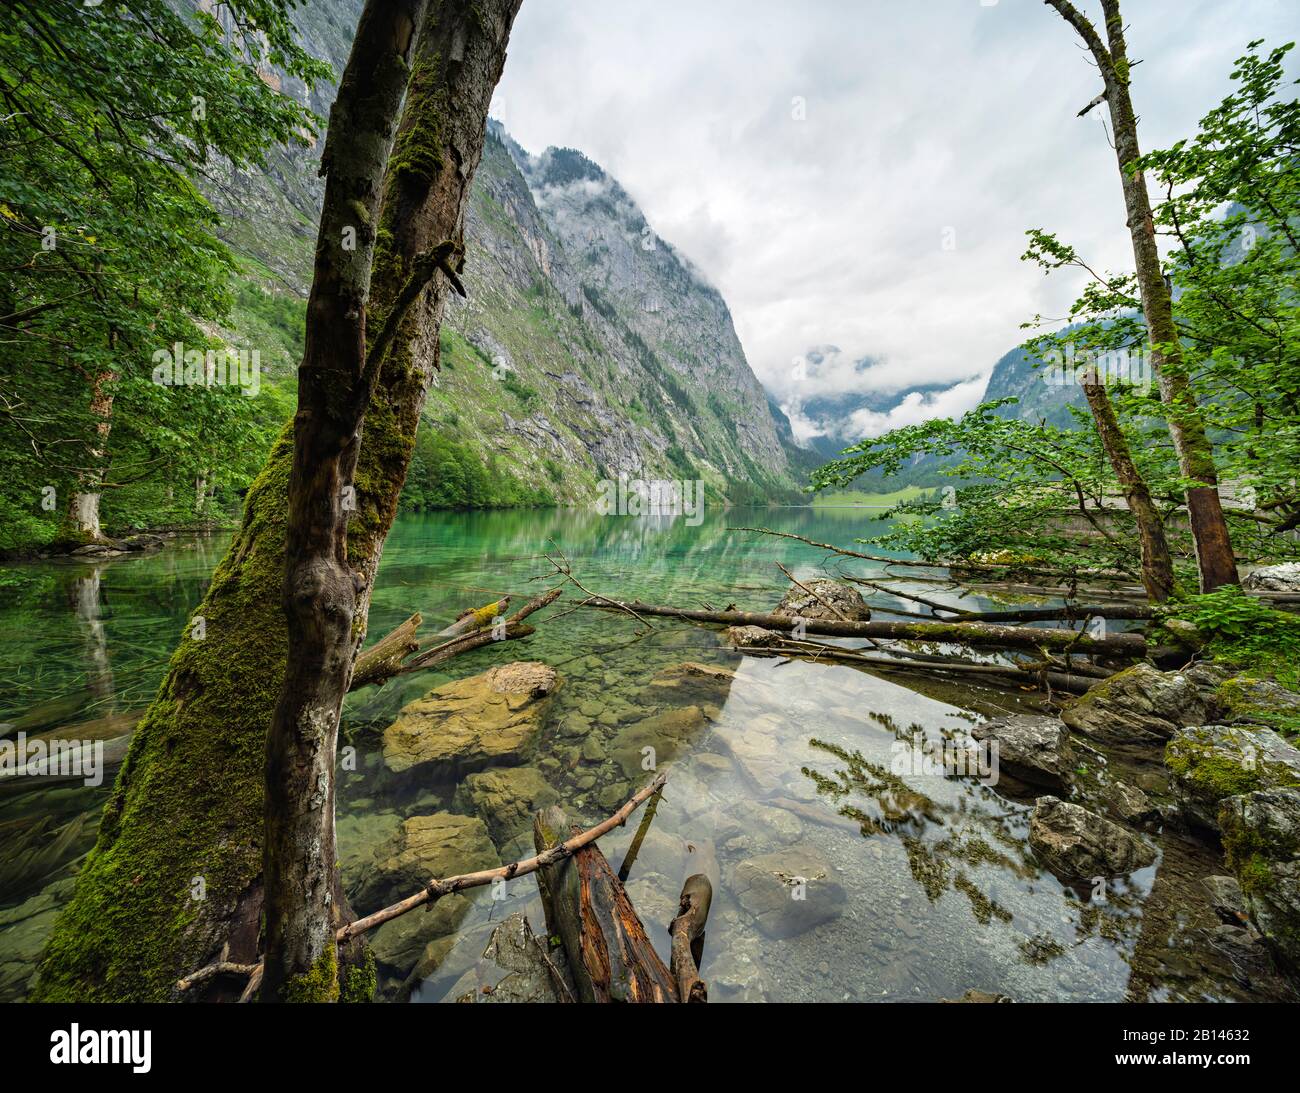 Untouched nature on the shore of the Obersee, tree trunks in the water, low hanging clouds, Berchtesgaden National Park, Bavaria, Germany Stock Photo